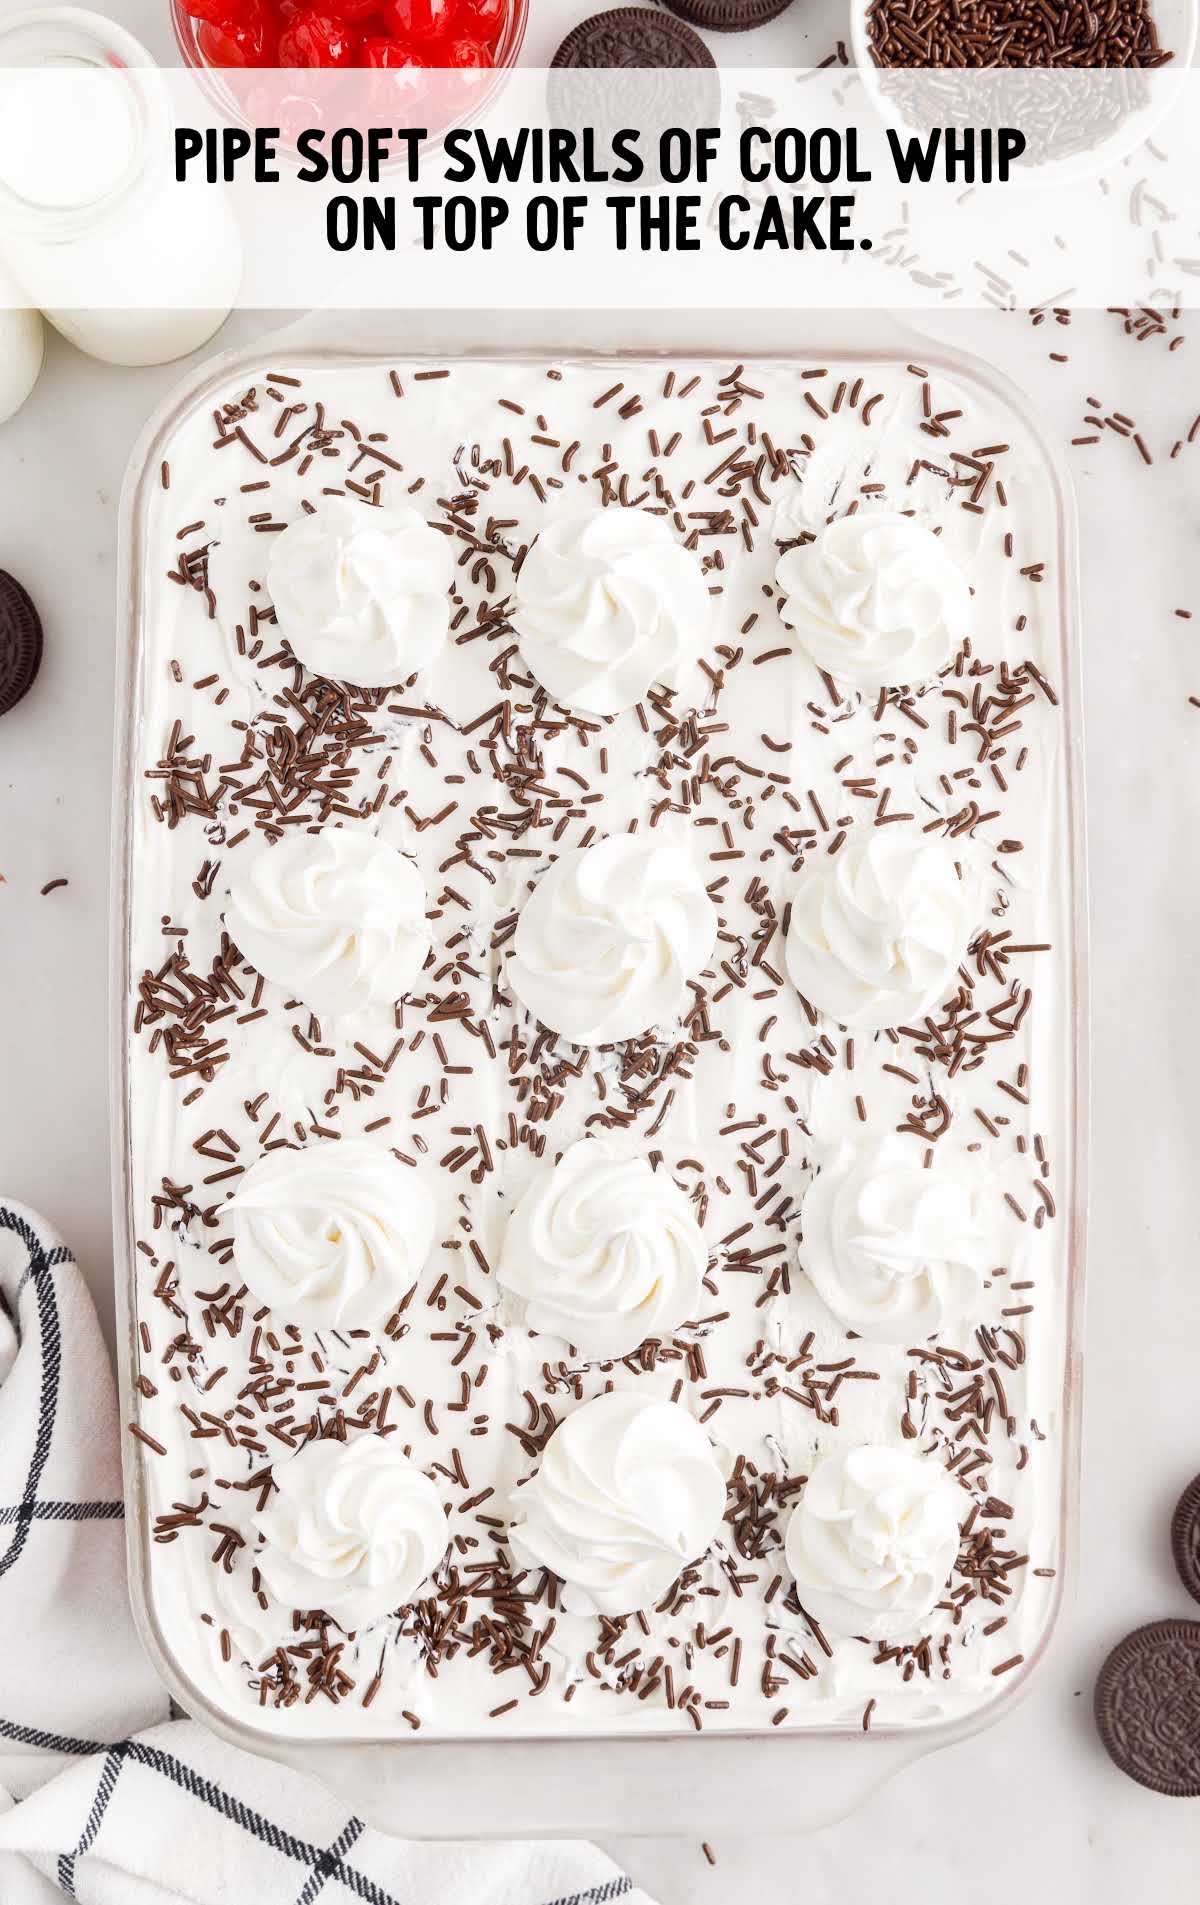 swirls of cool whip piped on top of the cake